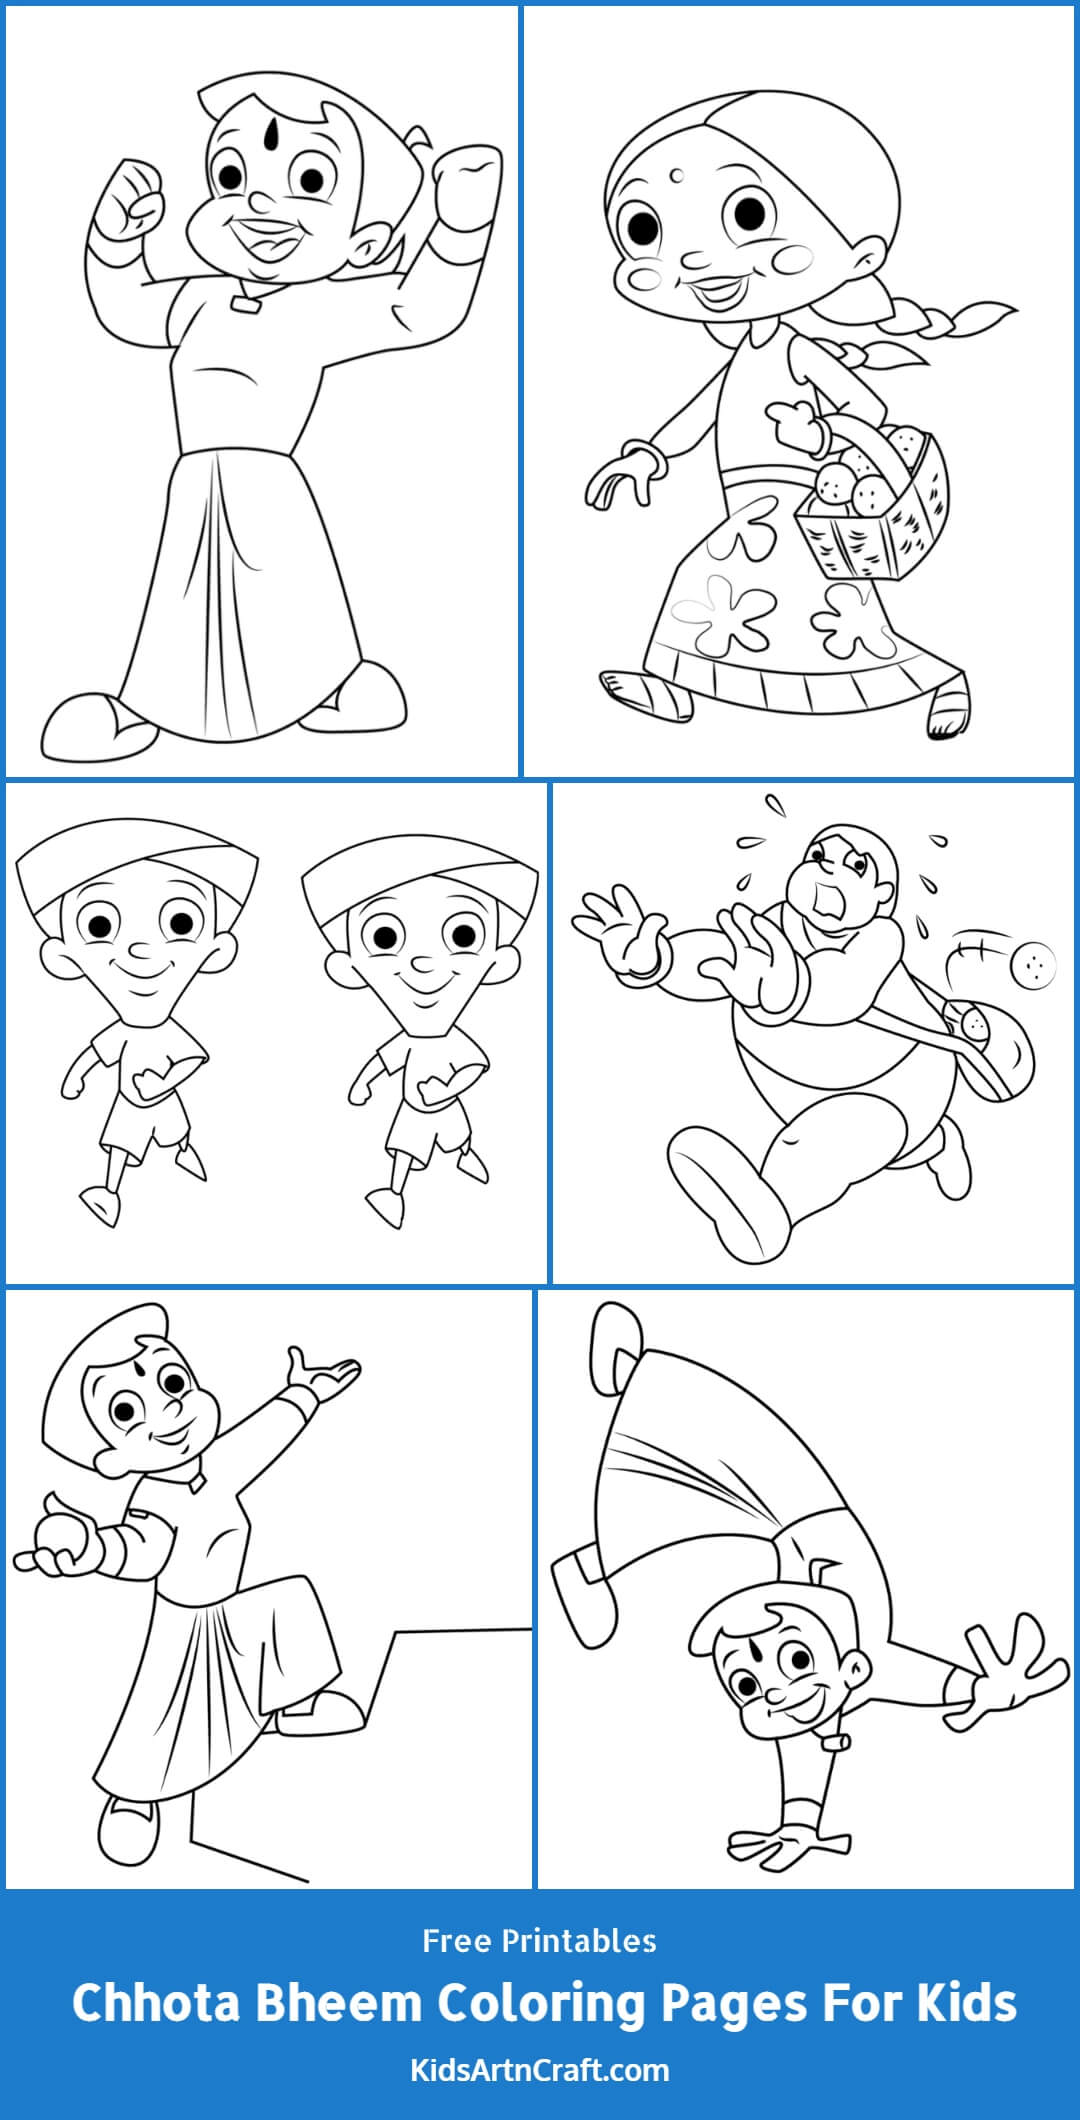 Chhota Bheem Coloring Pages For Kids – Free Printables - Kids Art & Craft